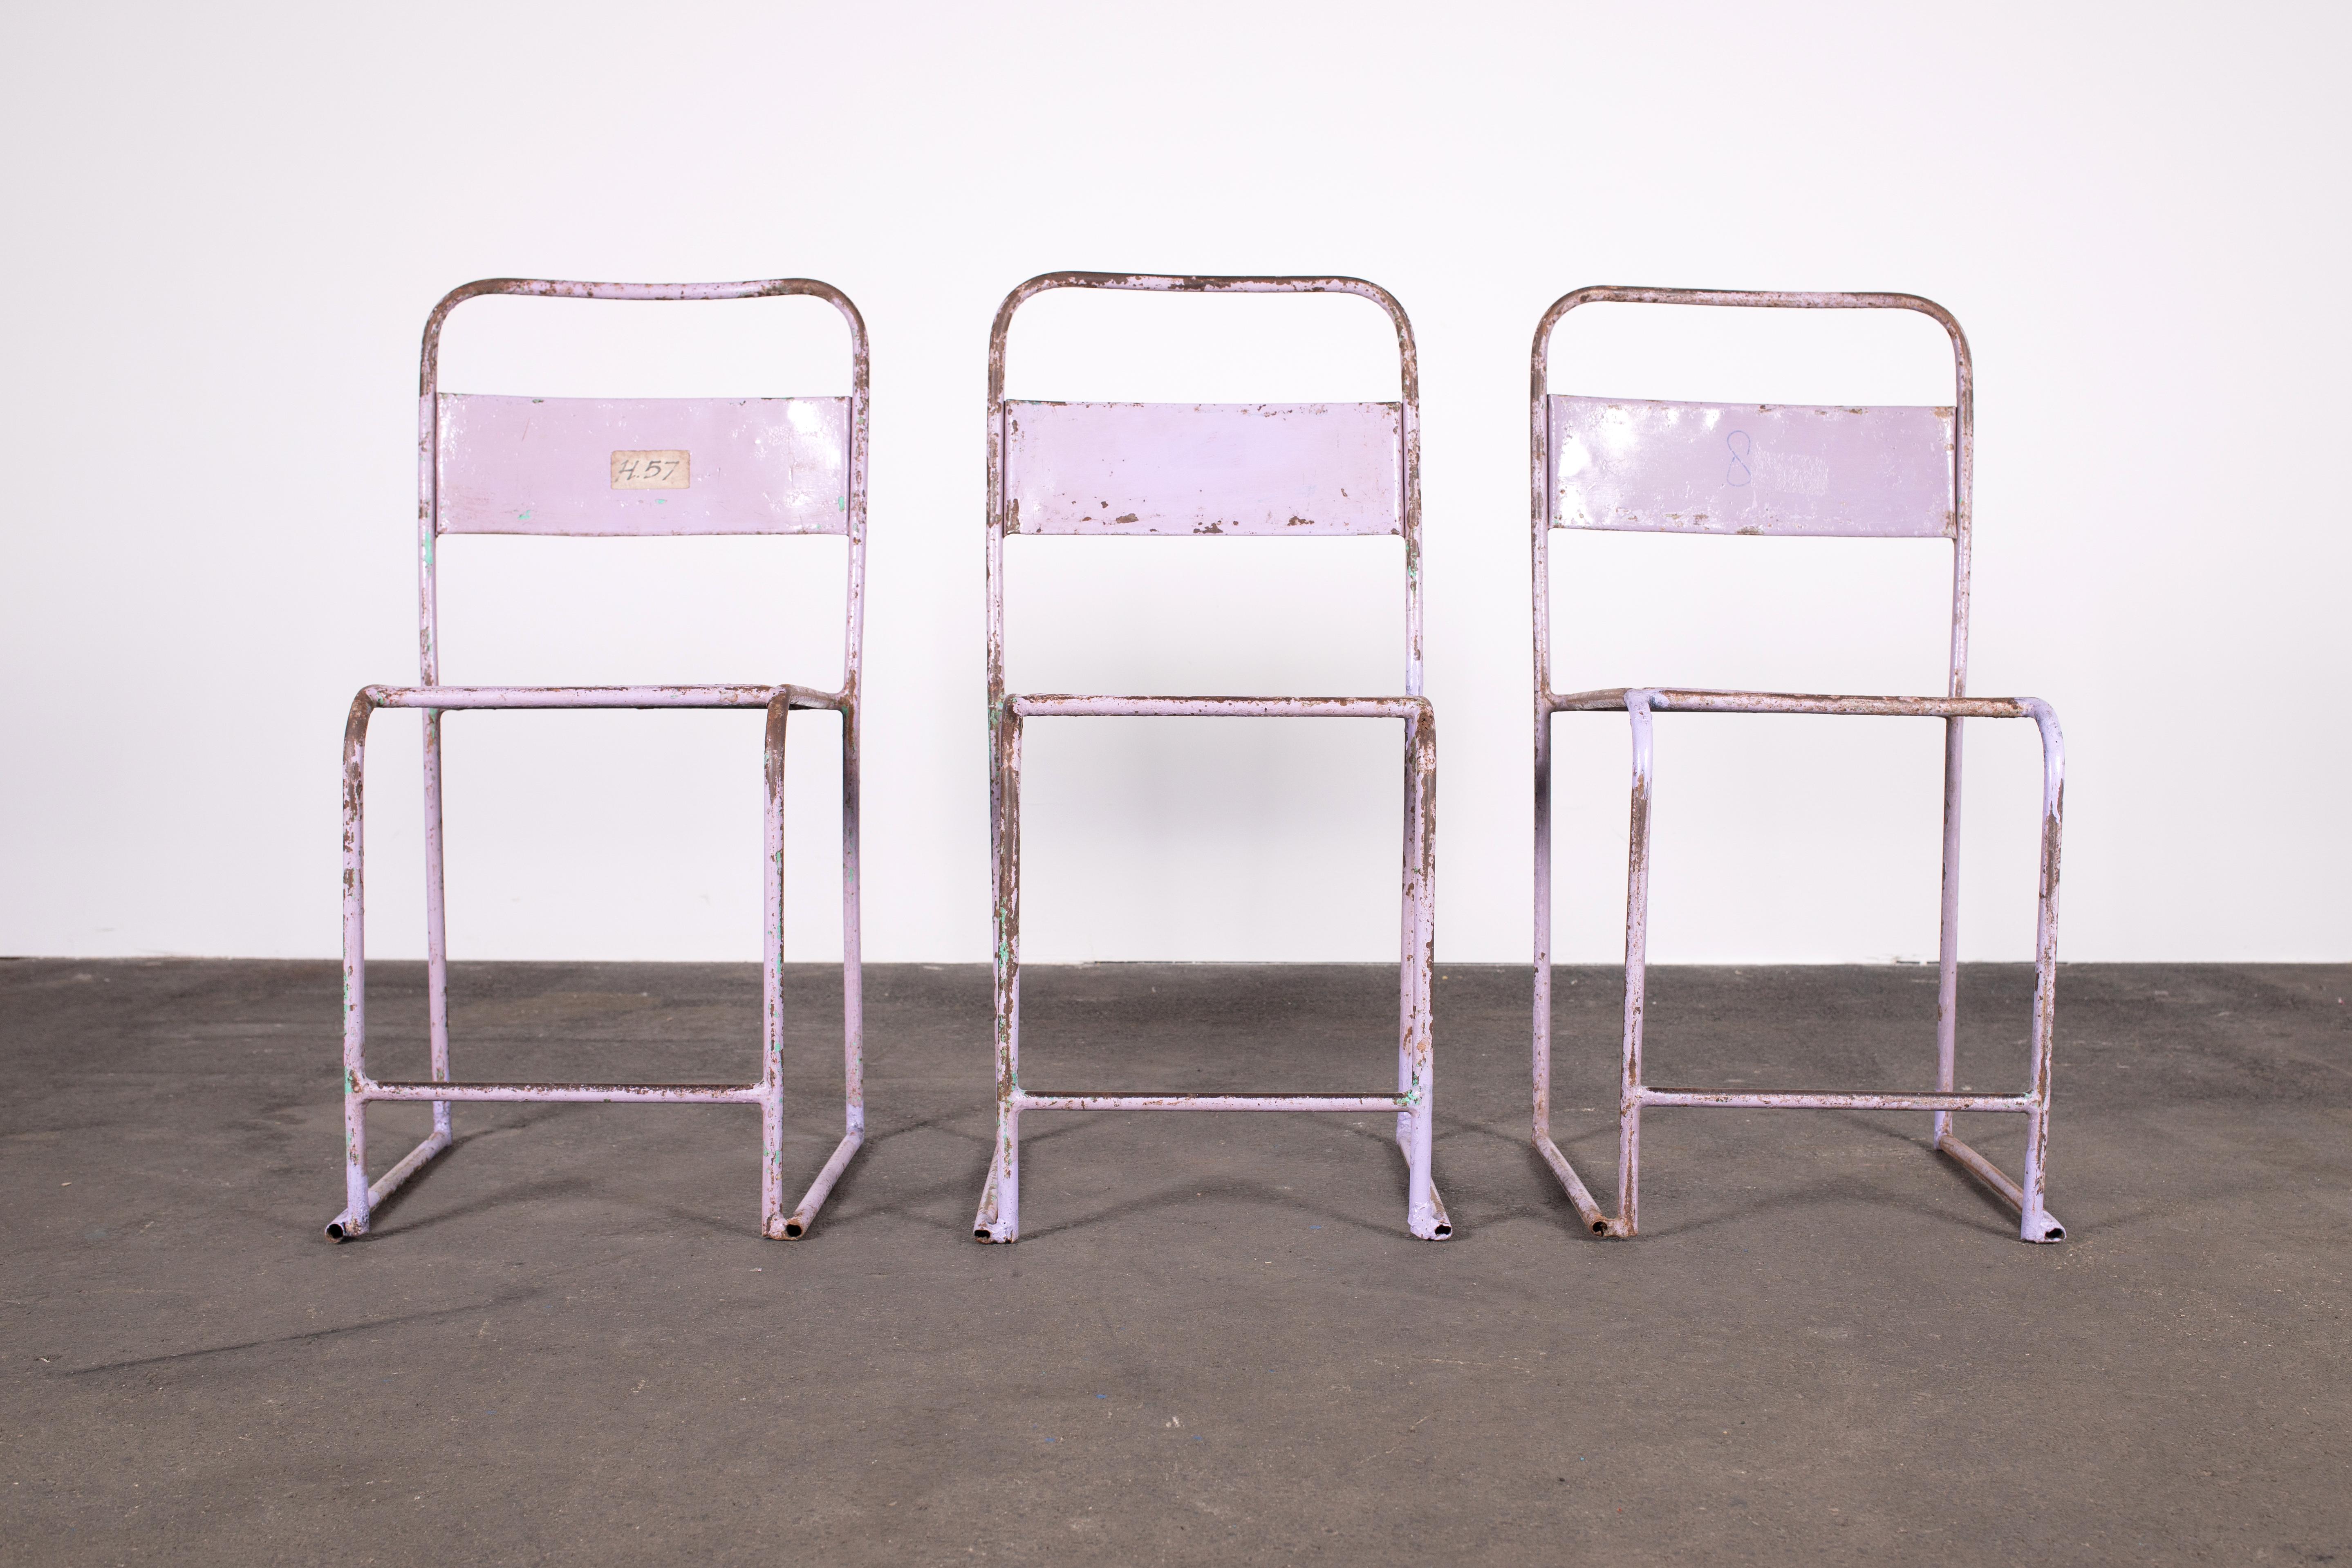 3 structurally sound and heavily patinated Mid-Century Modern Industrial Chic Tubular Steel Stacking Chairs in lilac and rust. Sourced in Germany, these chairs, likely of the 1930s, show construction techniques and functional aesthetic of the